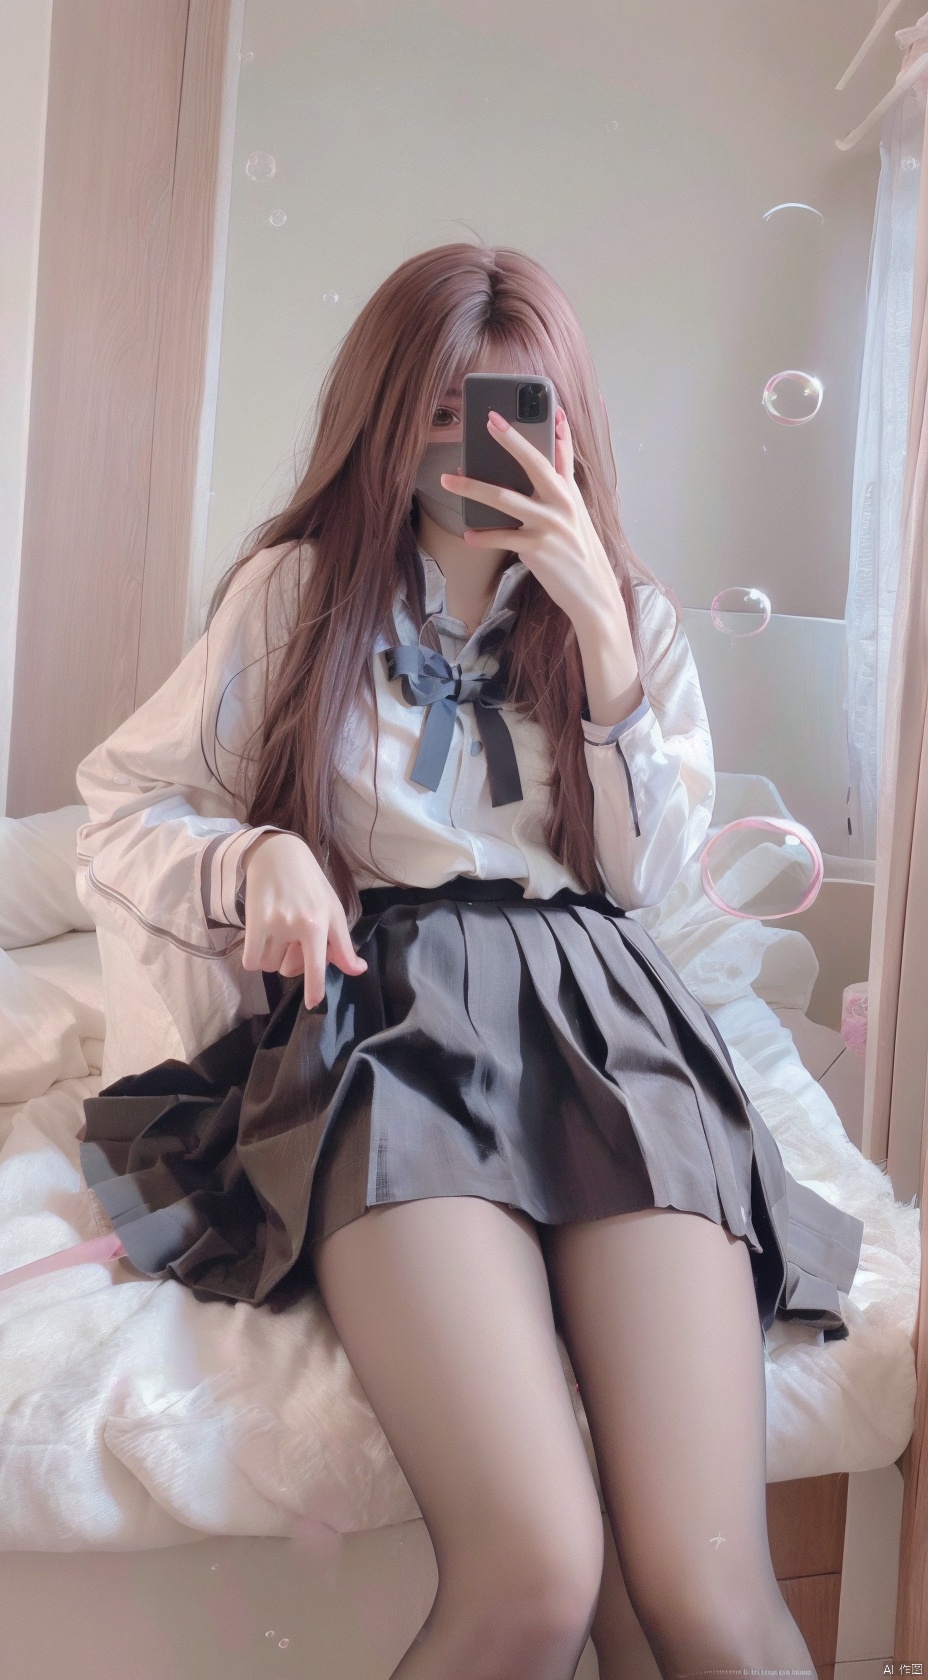 pink hair,(bubble:1.5),8K,Best quality, 1girl, xtt's body,A photo of oneself taken with a phone in front of a mirror,more details,white mask,full body,long wave hair,school uniform,Wearing blue Pleated skirt, wearing black pantyhose , sitting, ((Mobile selfie perspective)), shapely body,midnight, (Wearing a black mask),xtt, aki, spread legs_vagxxx, (\meng ze\), hkd1.5